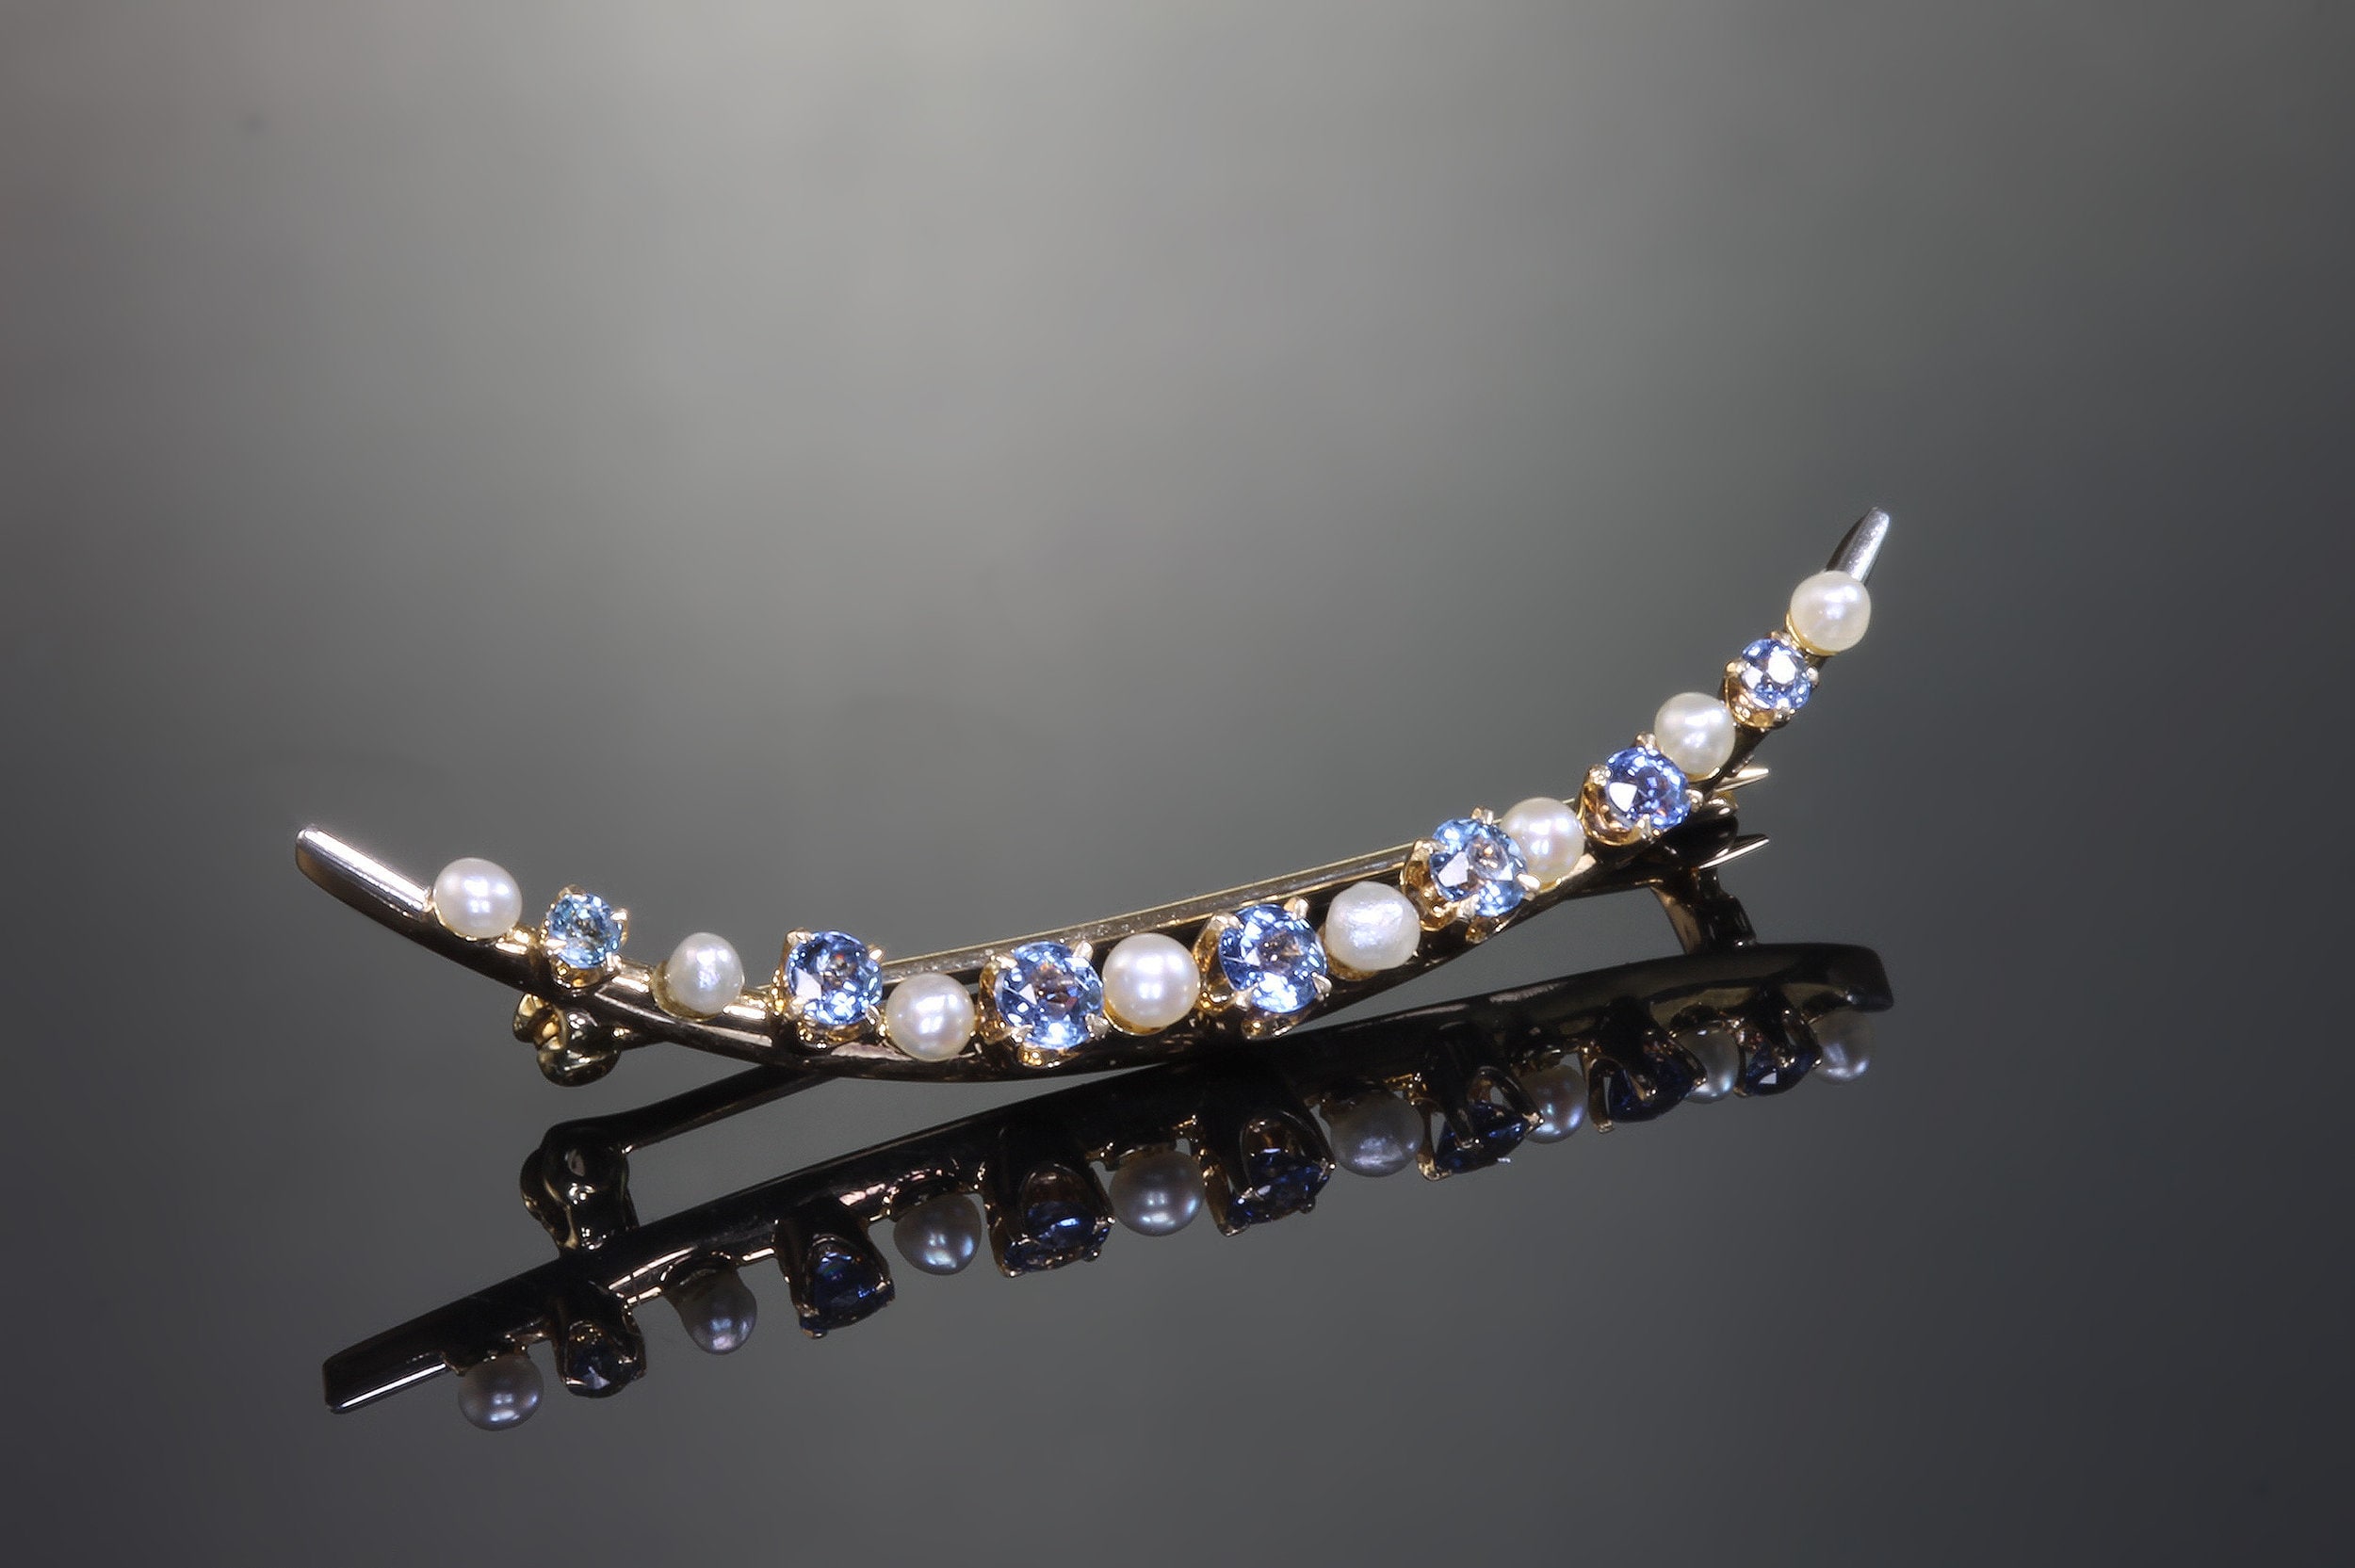 Vintage crescent moon brooch, 14K yellow gold, sapphires, pearls